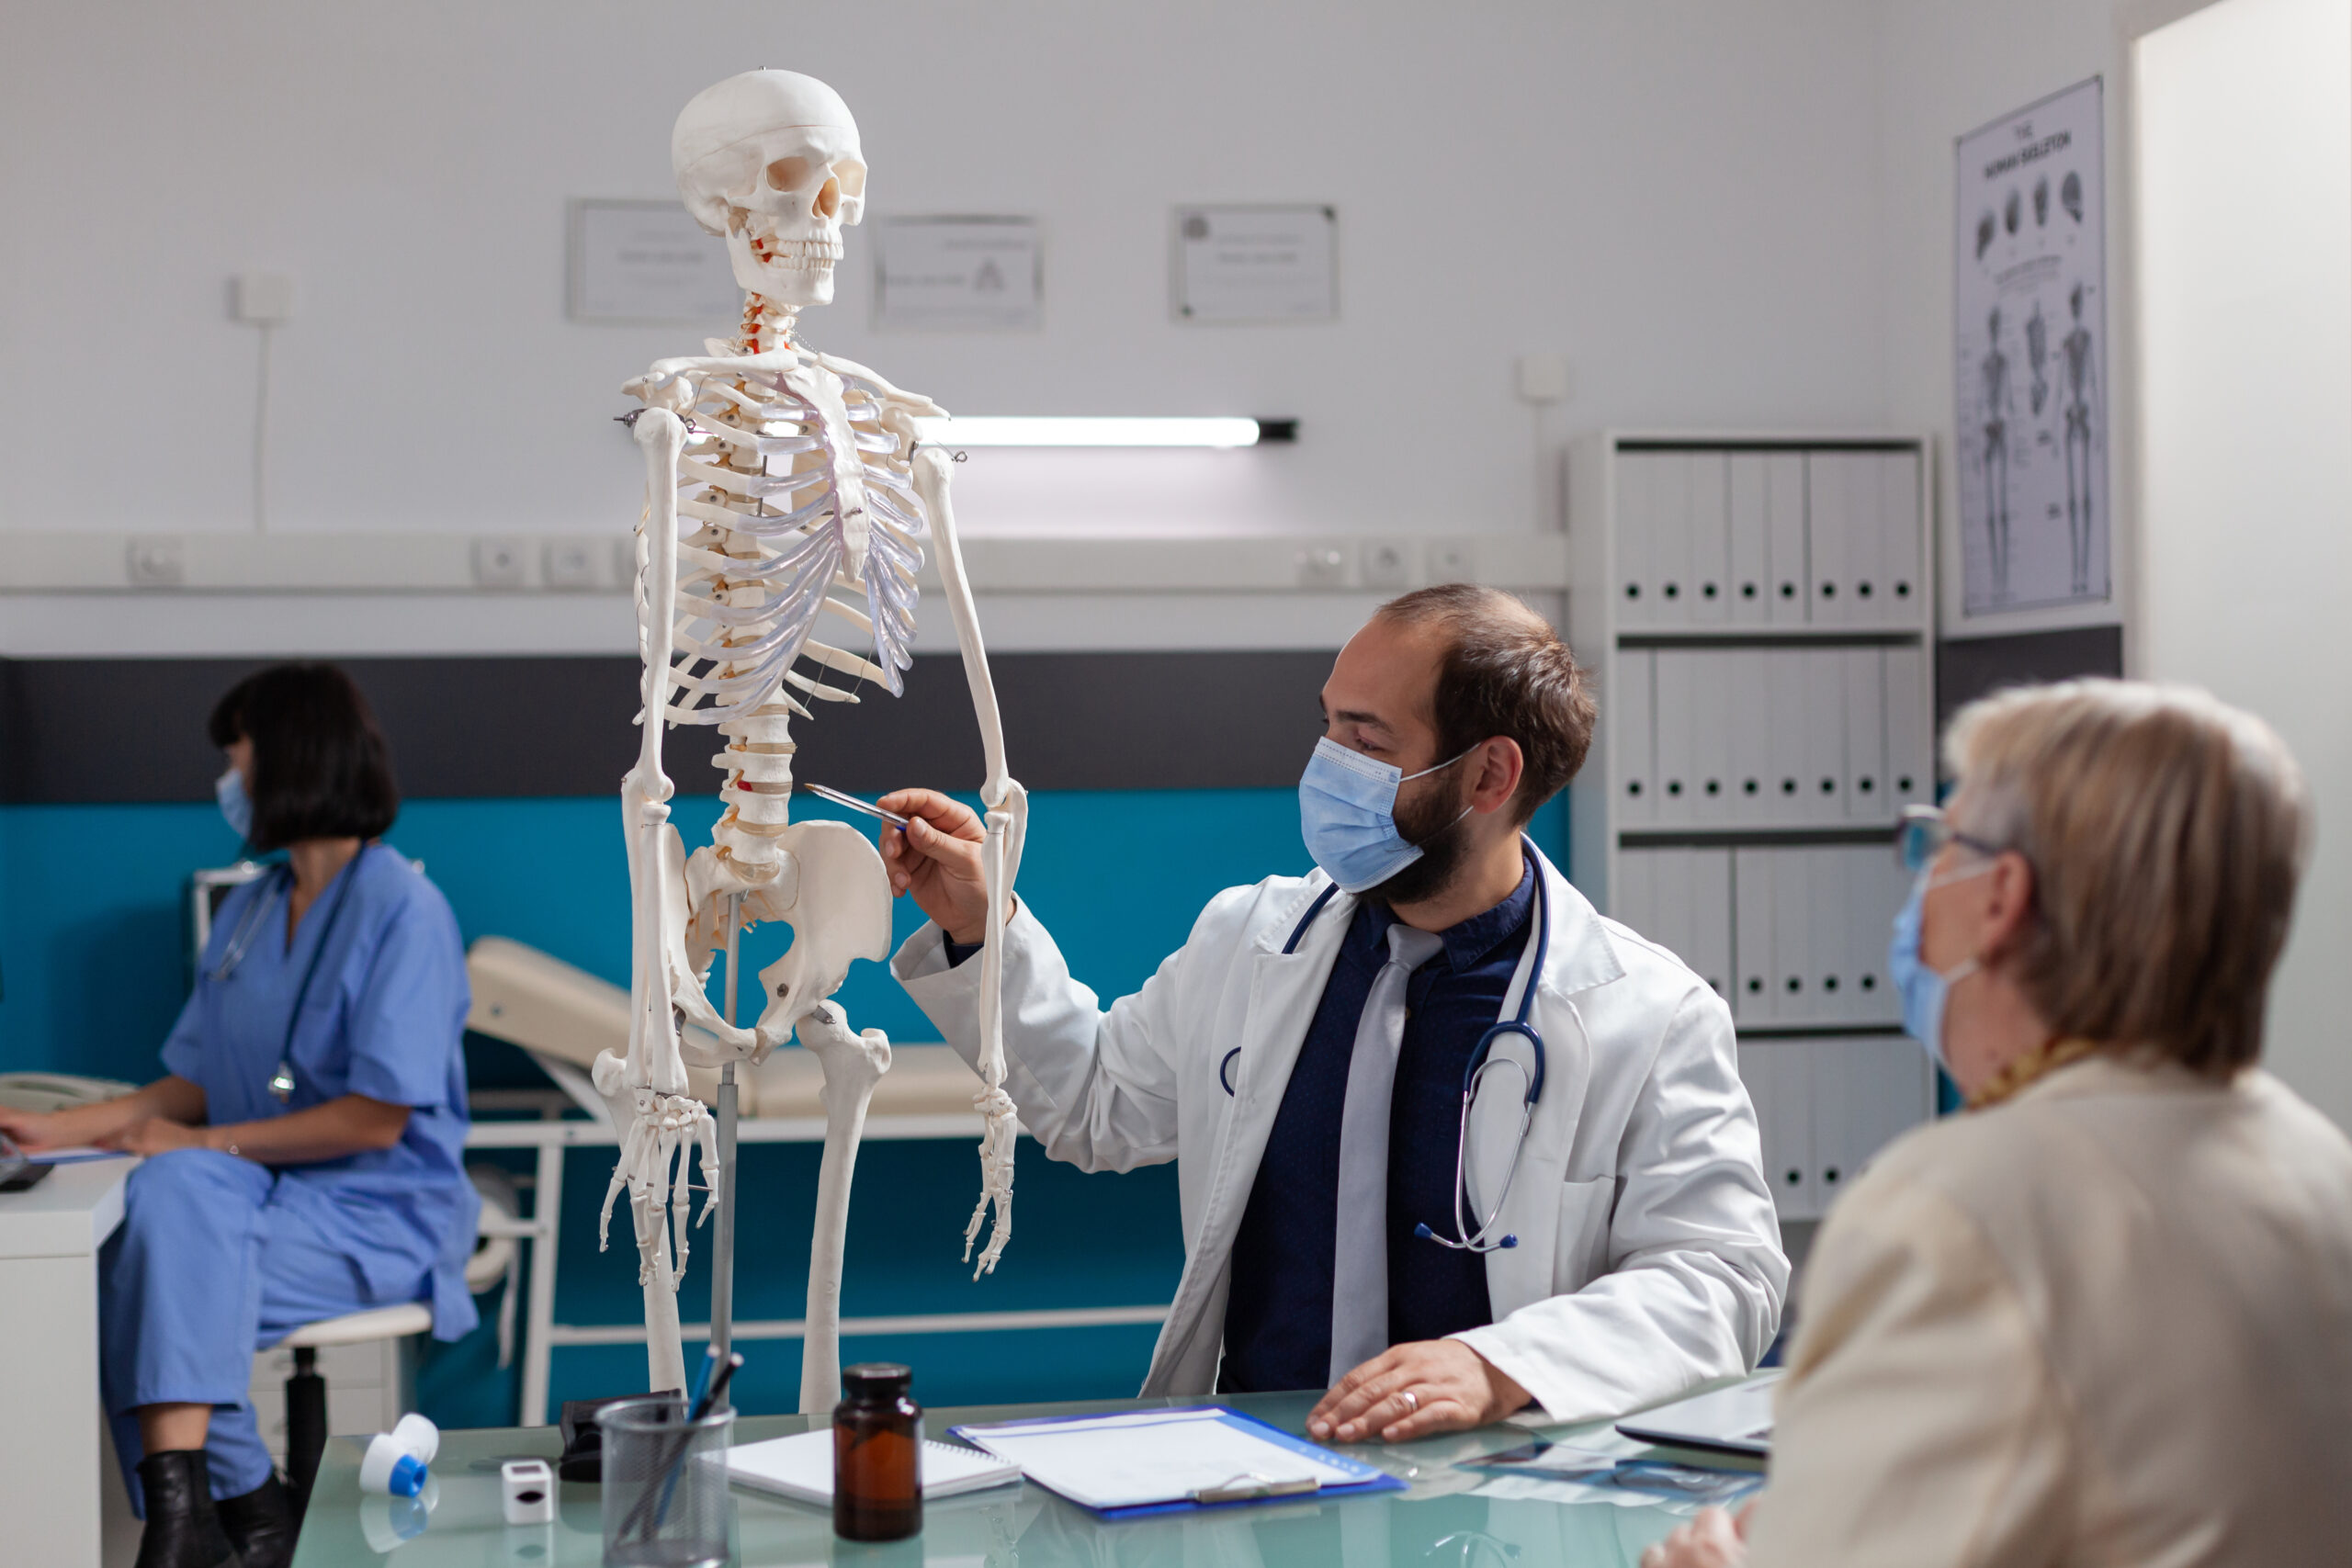 Specialist explaining human skeleton to retired woman at checkup visit, talking about bones injury at osteopathy appointment during covid 19 pandemic. Doctor showing joint model to patient.